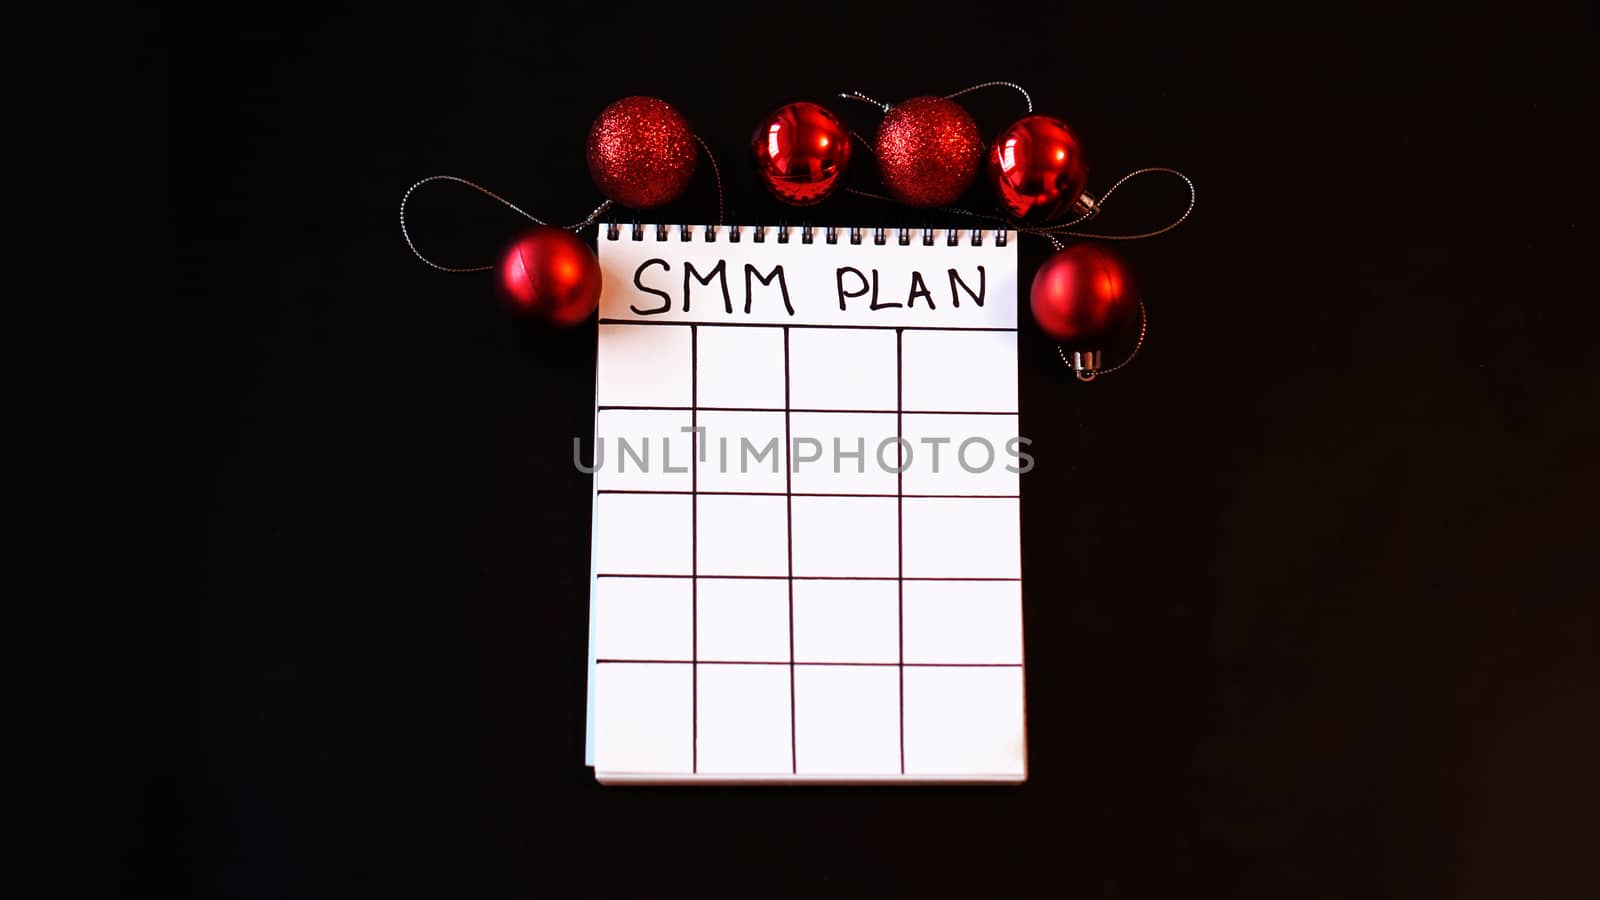 Freelance project. SMM plan blank. White sheet on a black festive background with red Christmas balls